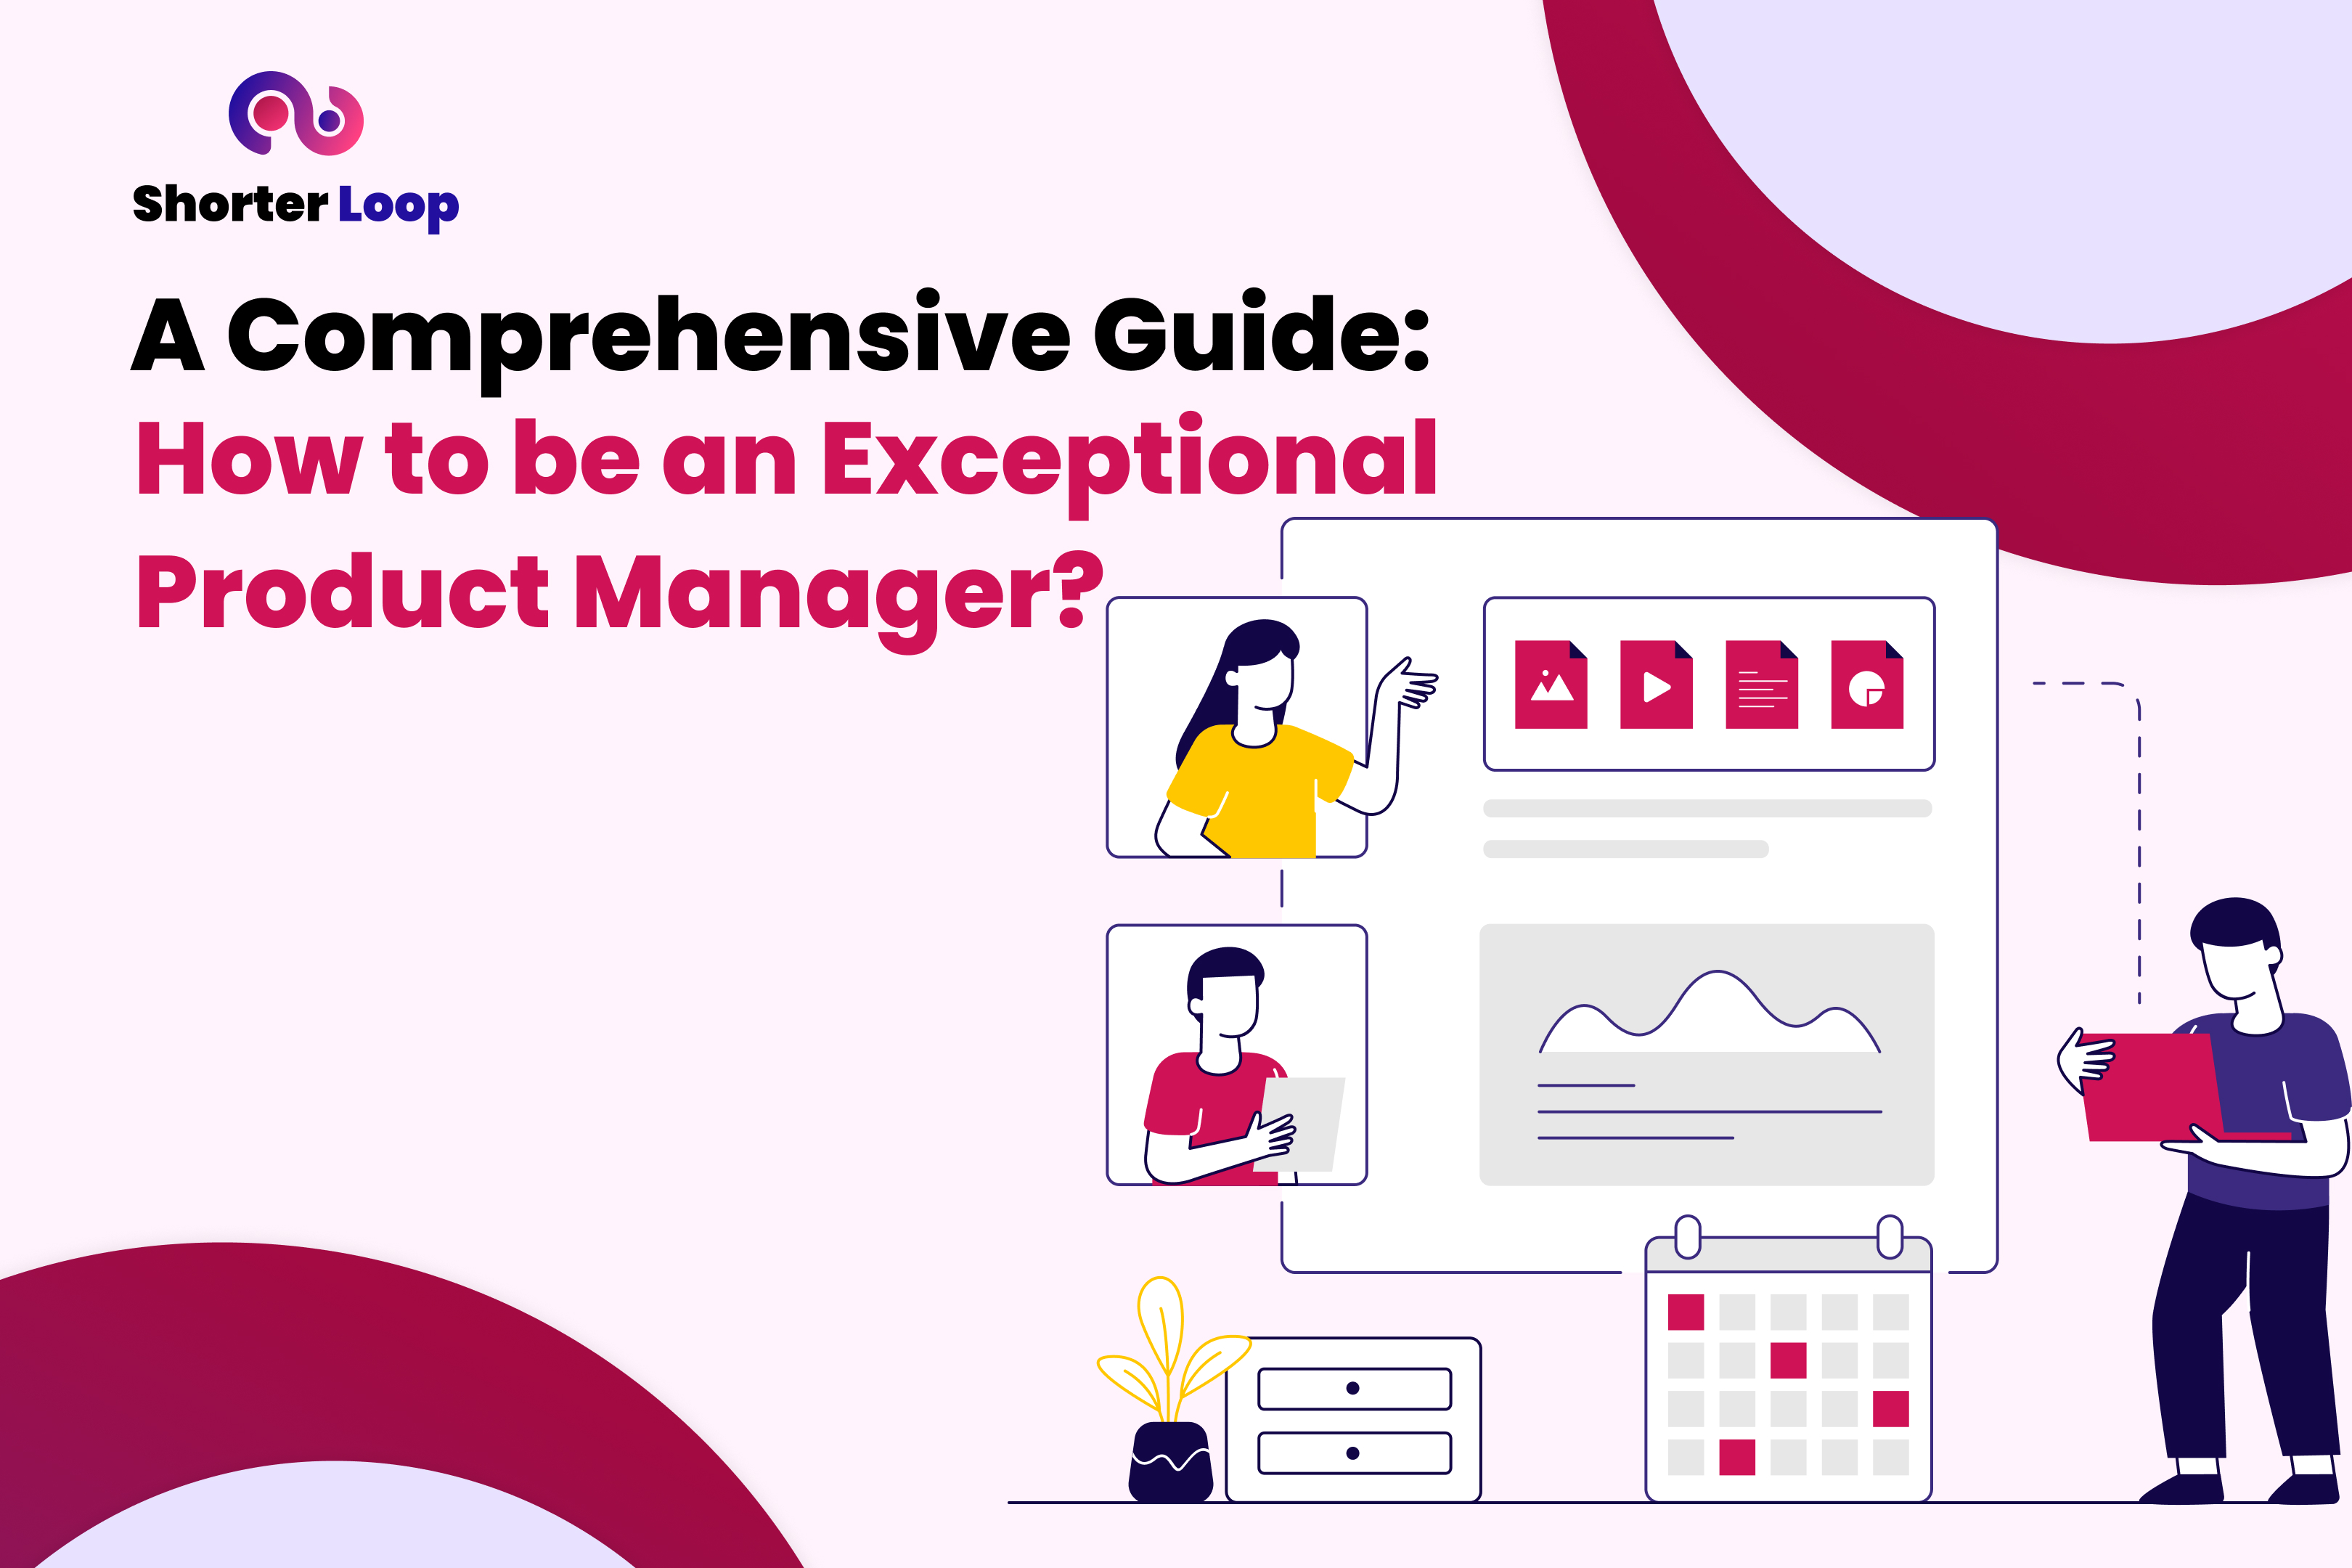 A Comprehensive Guide: How to be an Exceptional Product Manager?